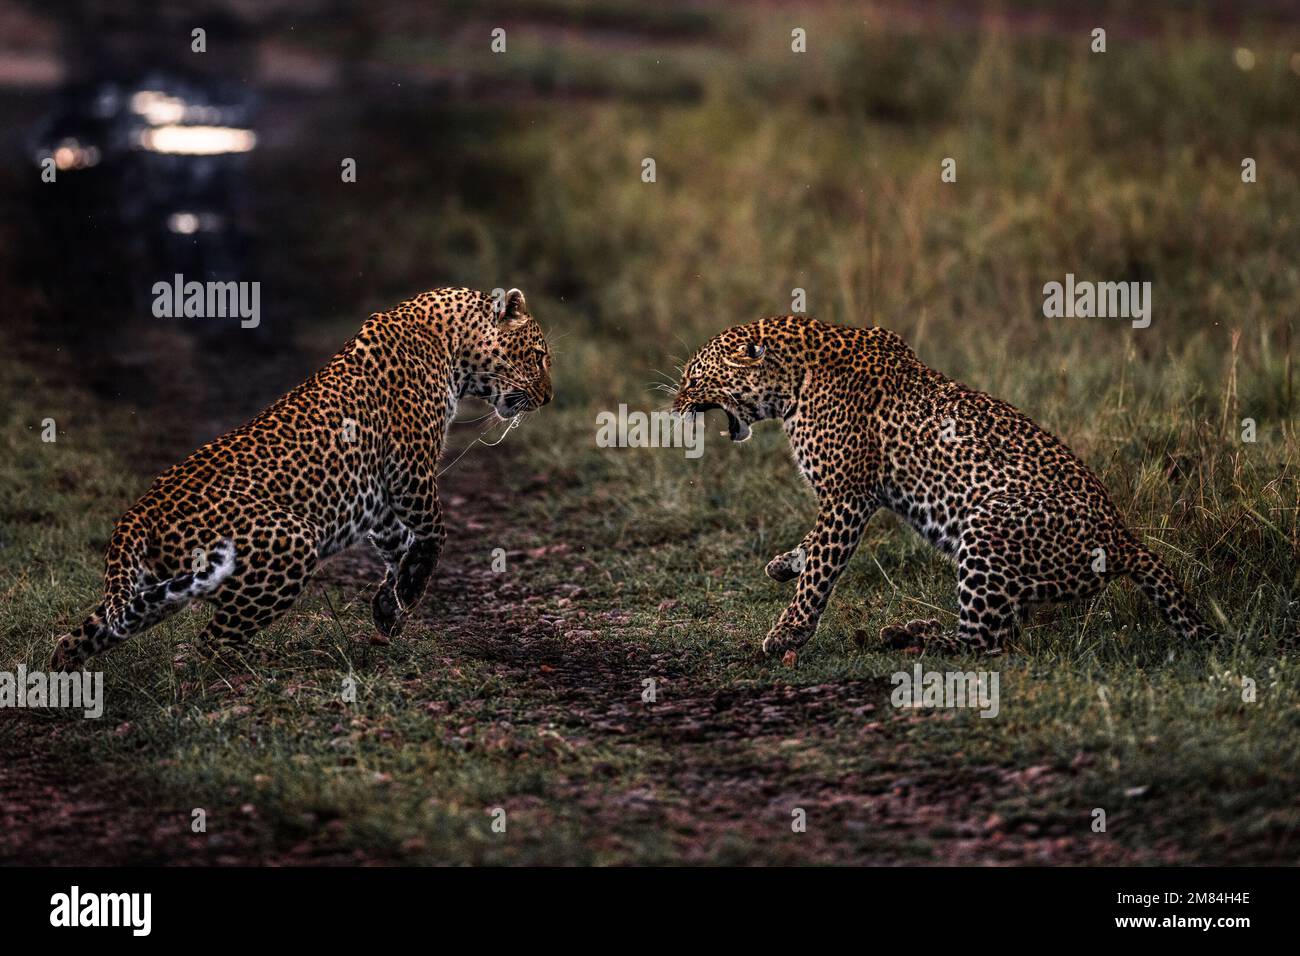 Sizing each other up. Kenya: IF YOU thought you had a problem with boomerang children unwilling to fly the nest spare a thought for this mother leopar Stock Photo